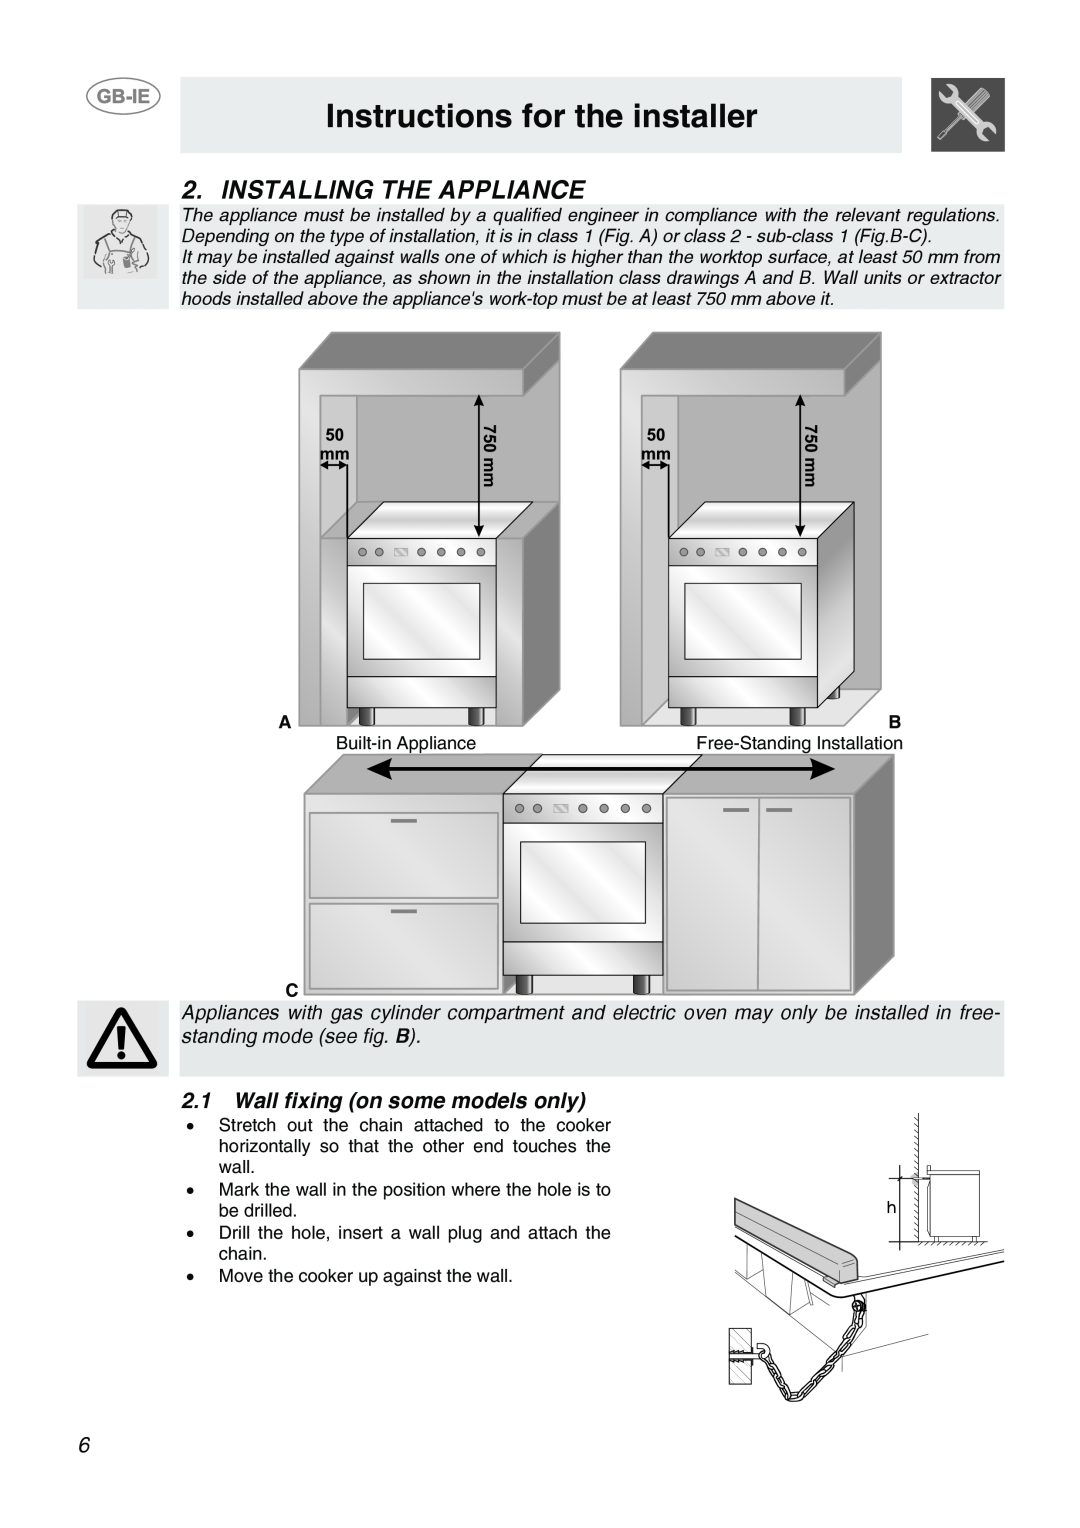 Smeg CB66CES1 manual Instructions for the installer, Installing The Appliance, Wall fixing on some models only 